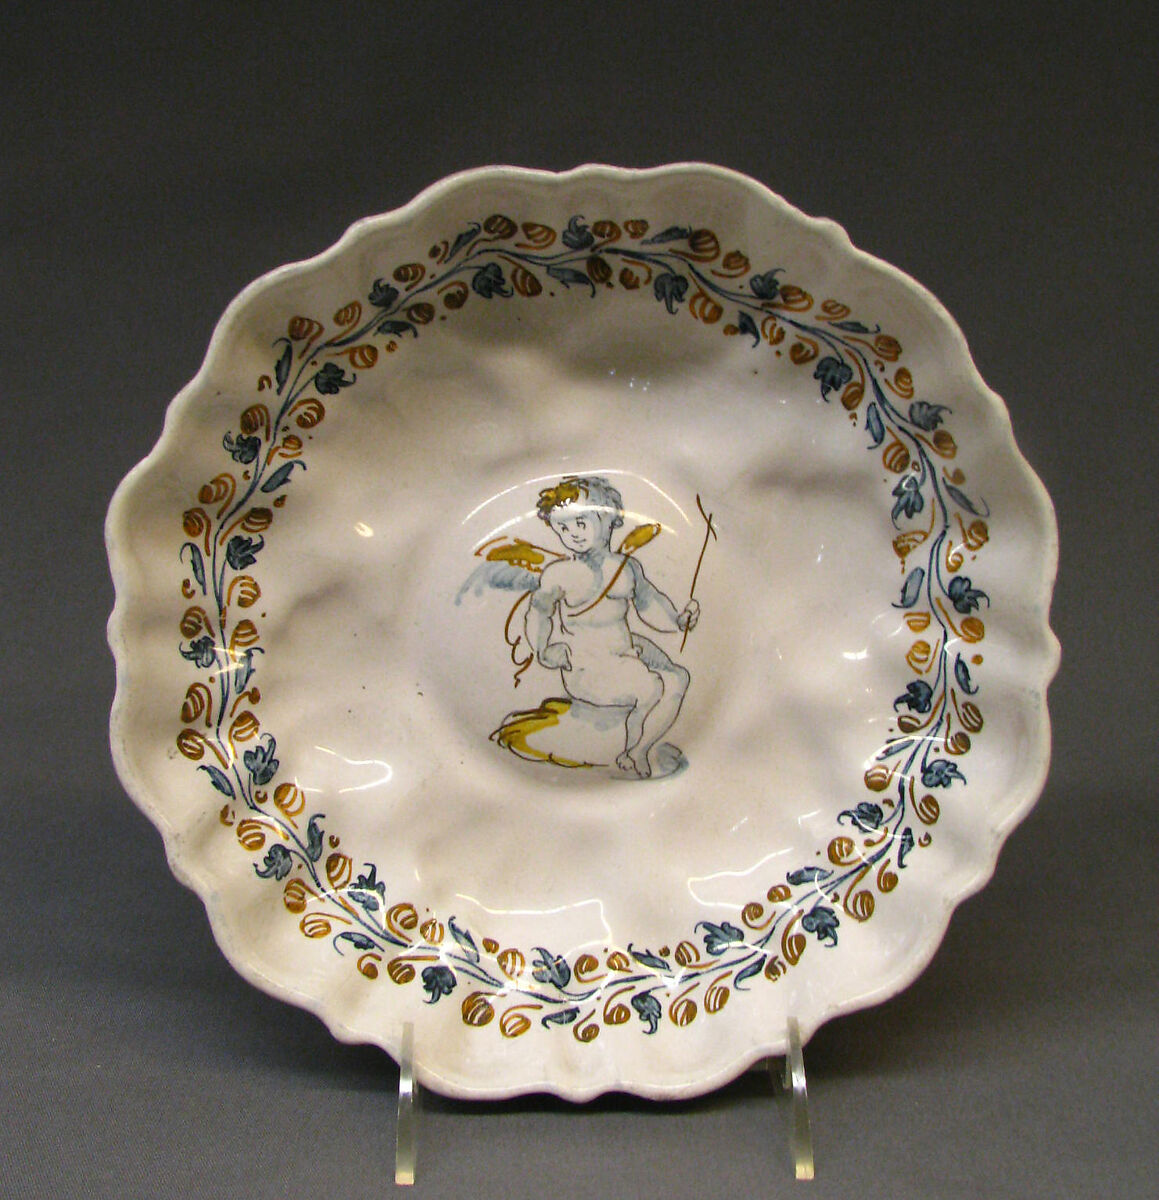 Footed dish, Tin-glazed earthenware, probably French, Nevers